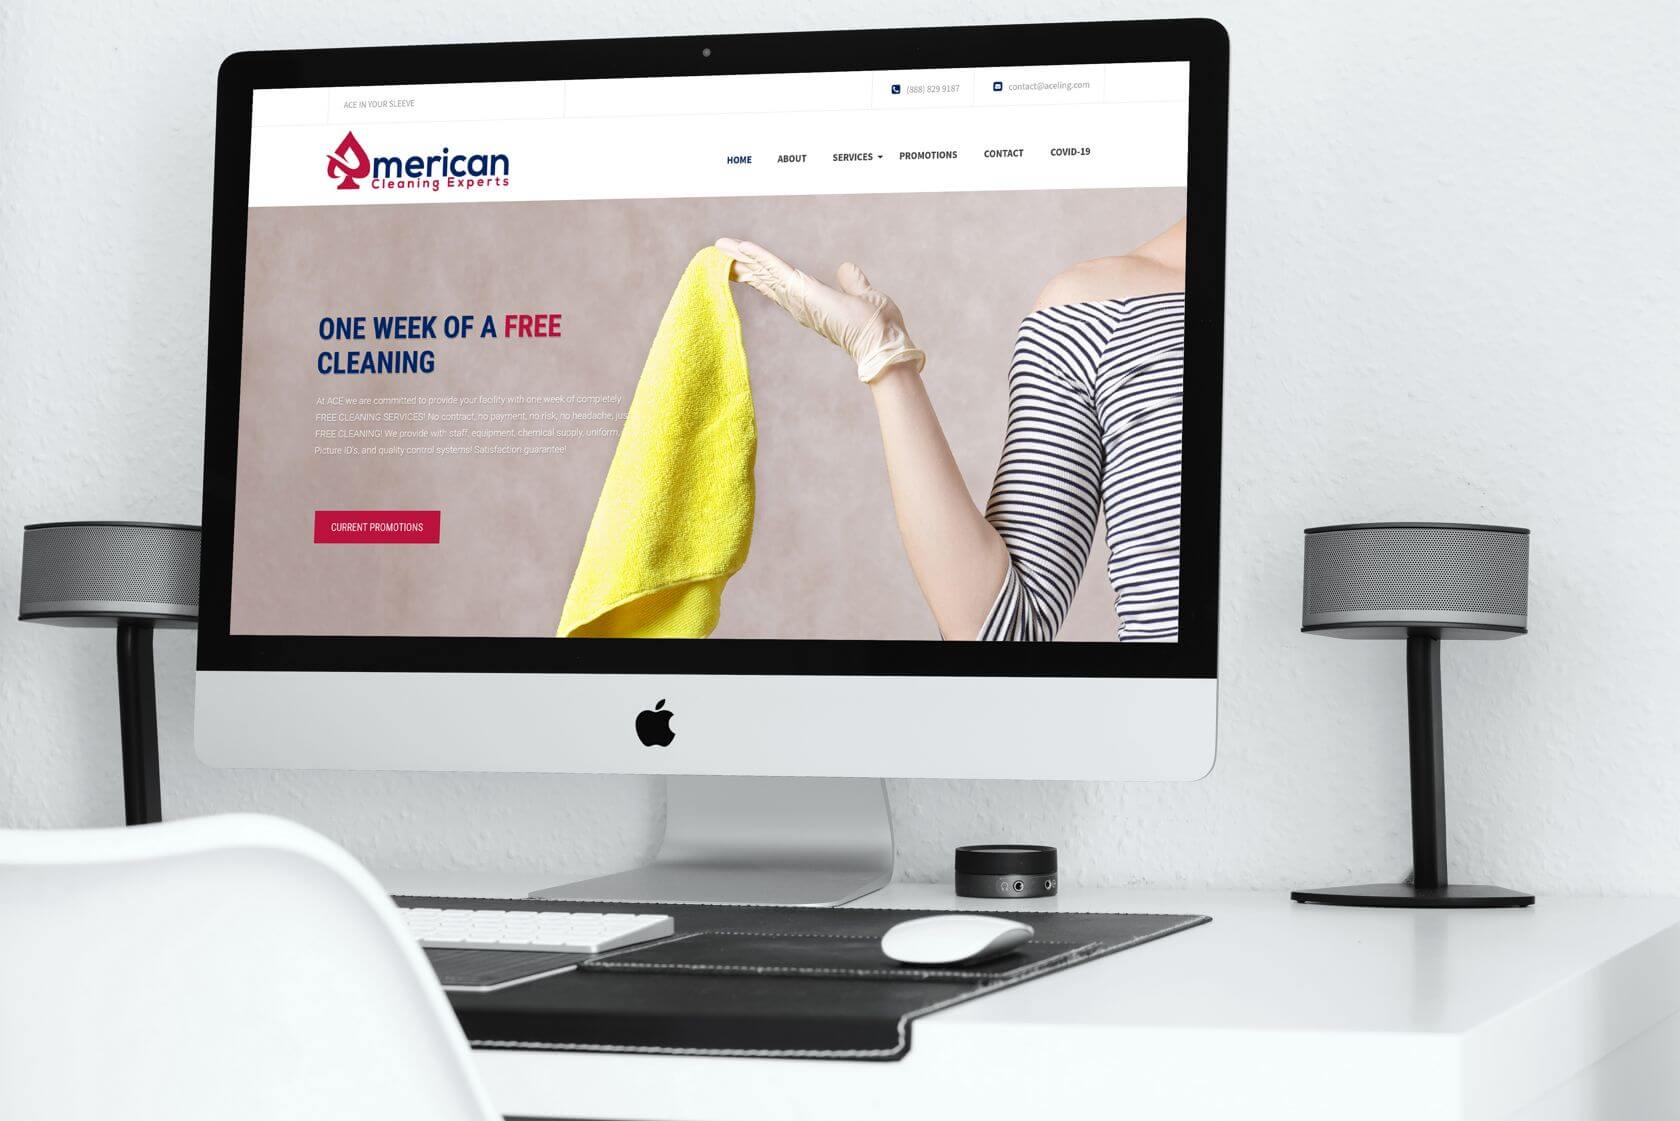 American Cleaning Experts